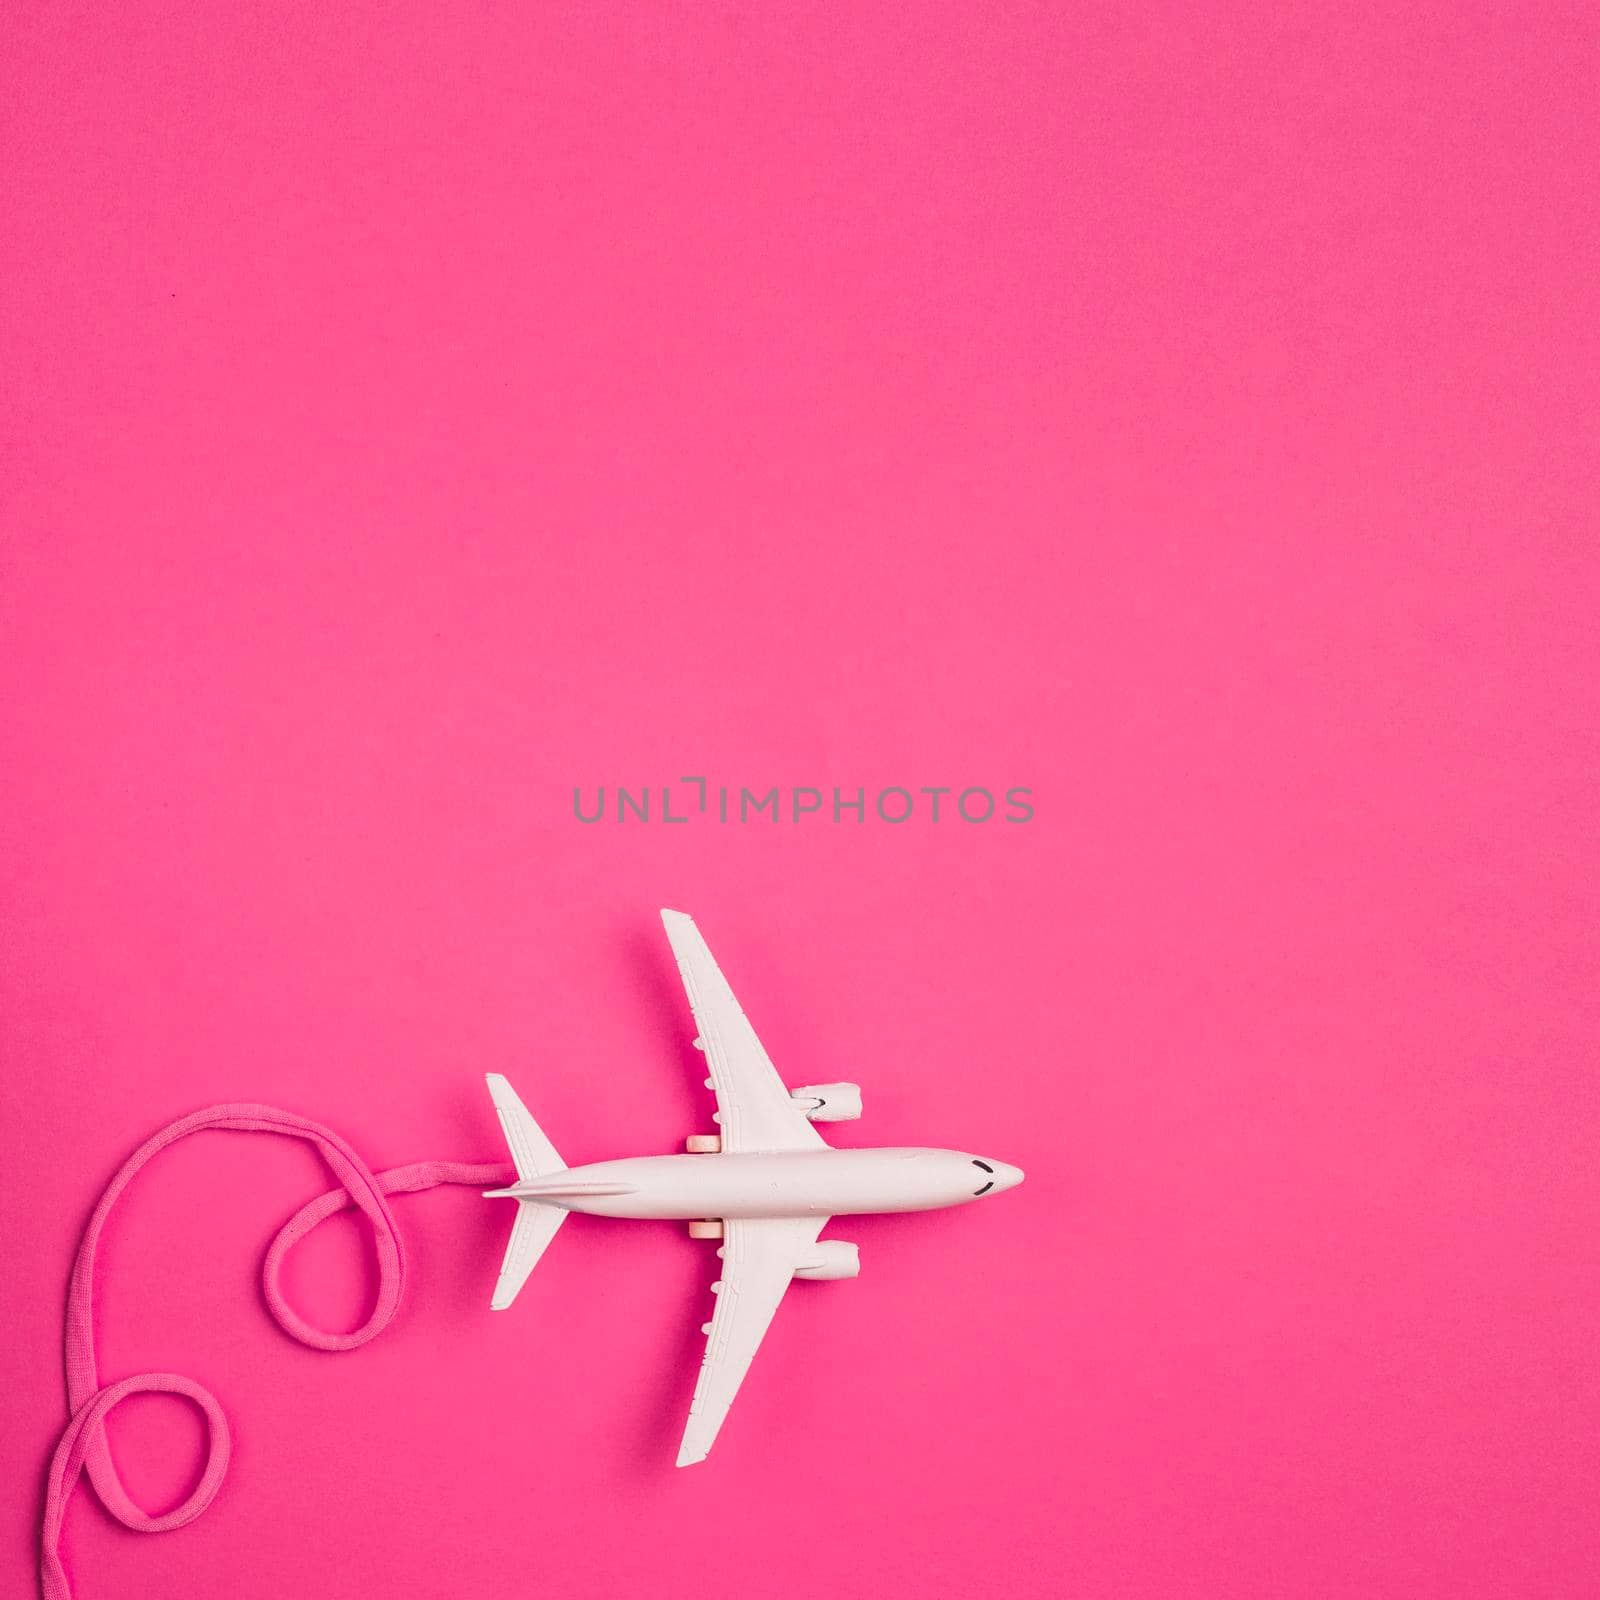 toy plane with pink lace. High quality photo by Zahard